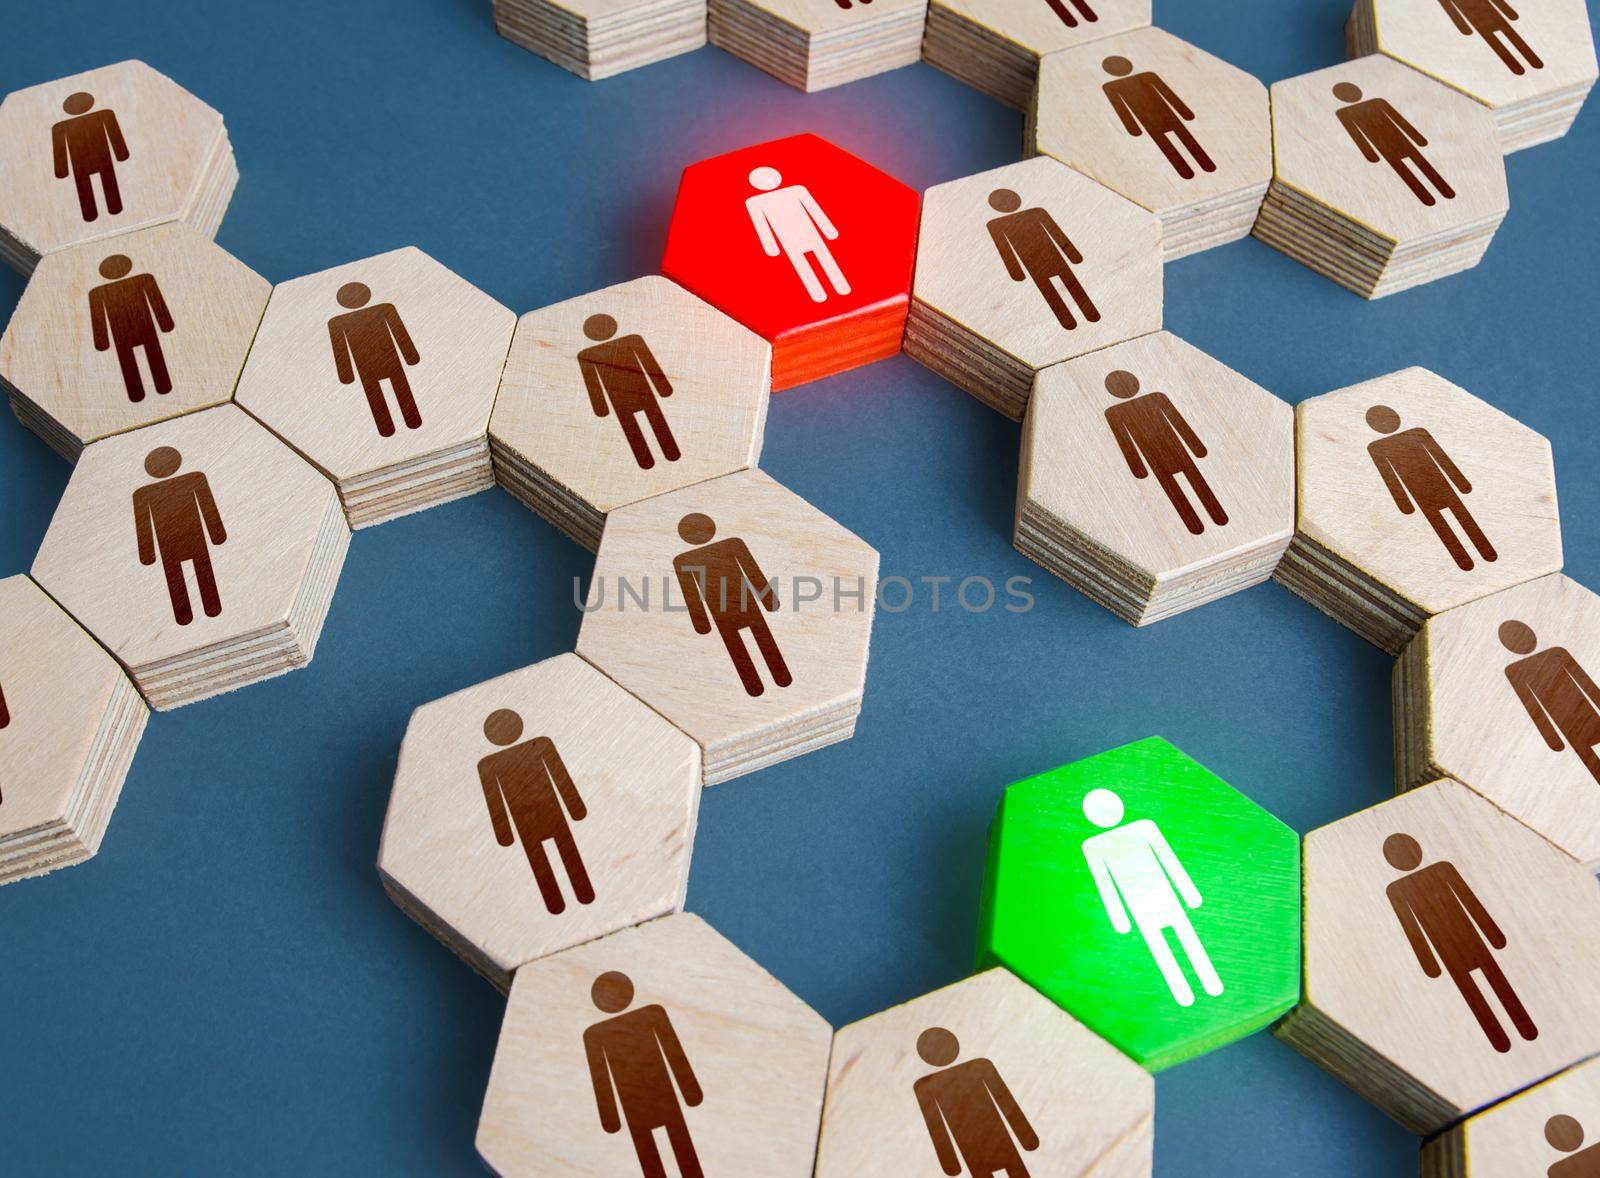 Red and green men are connecting links in a people system network. Ensuring communication between groups of people. Mediation, networking. Duplicate employee. Competition. Alternative connections.